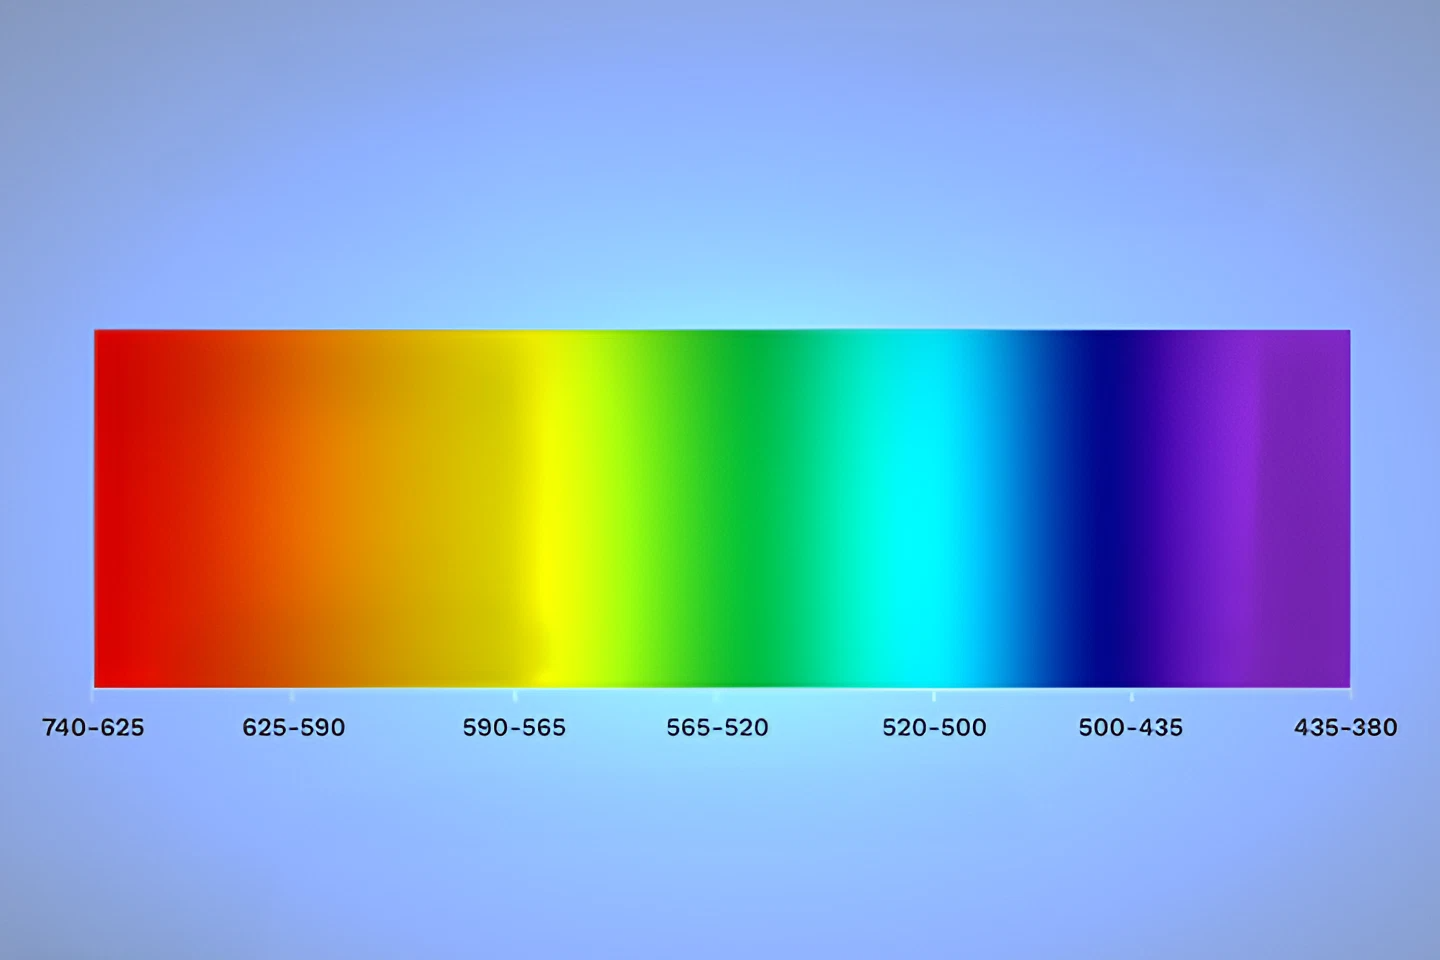 Understanding the Visible Light Spectrum and Color